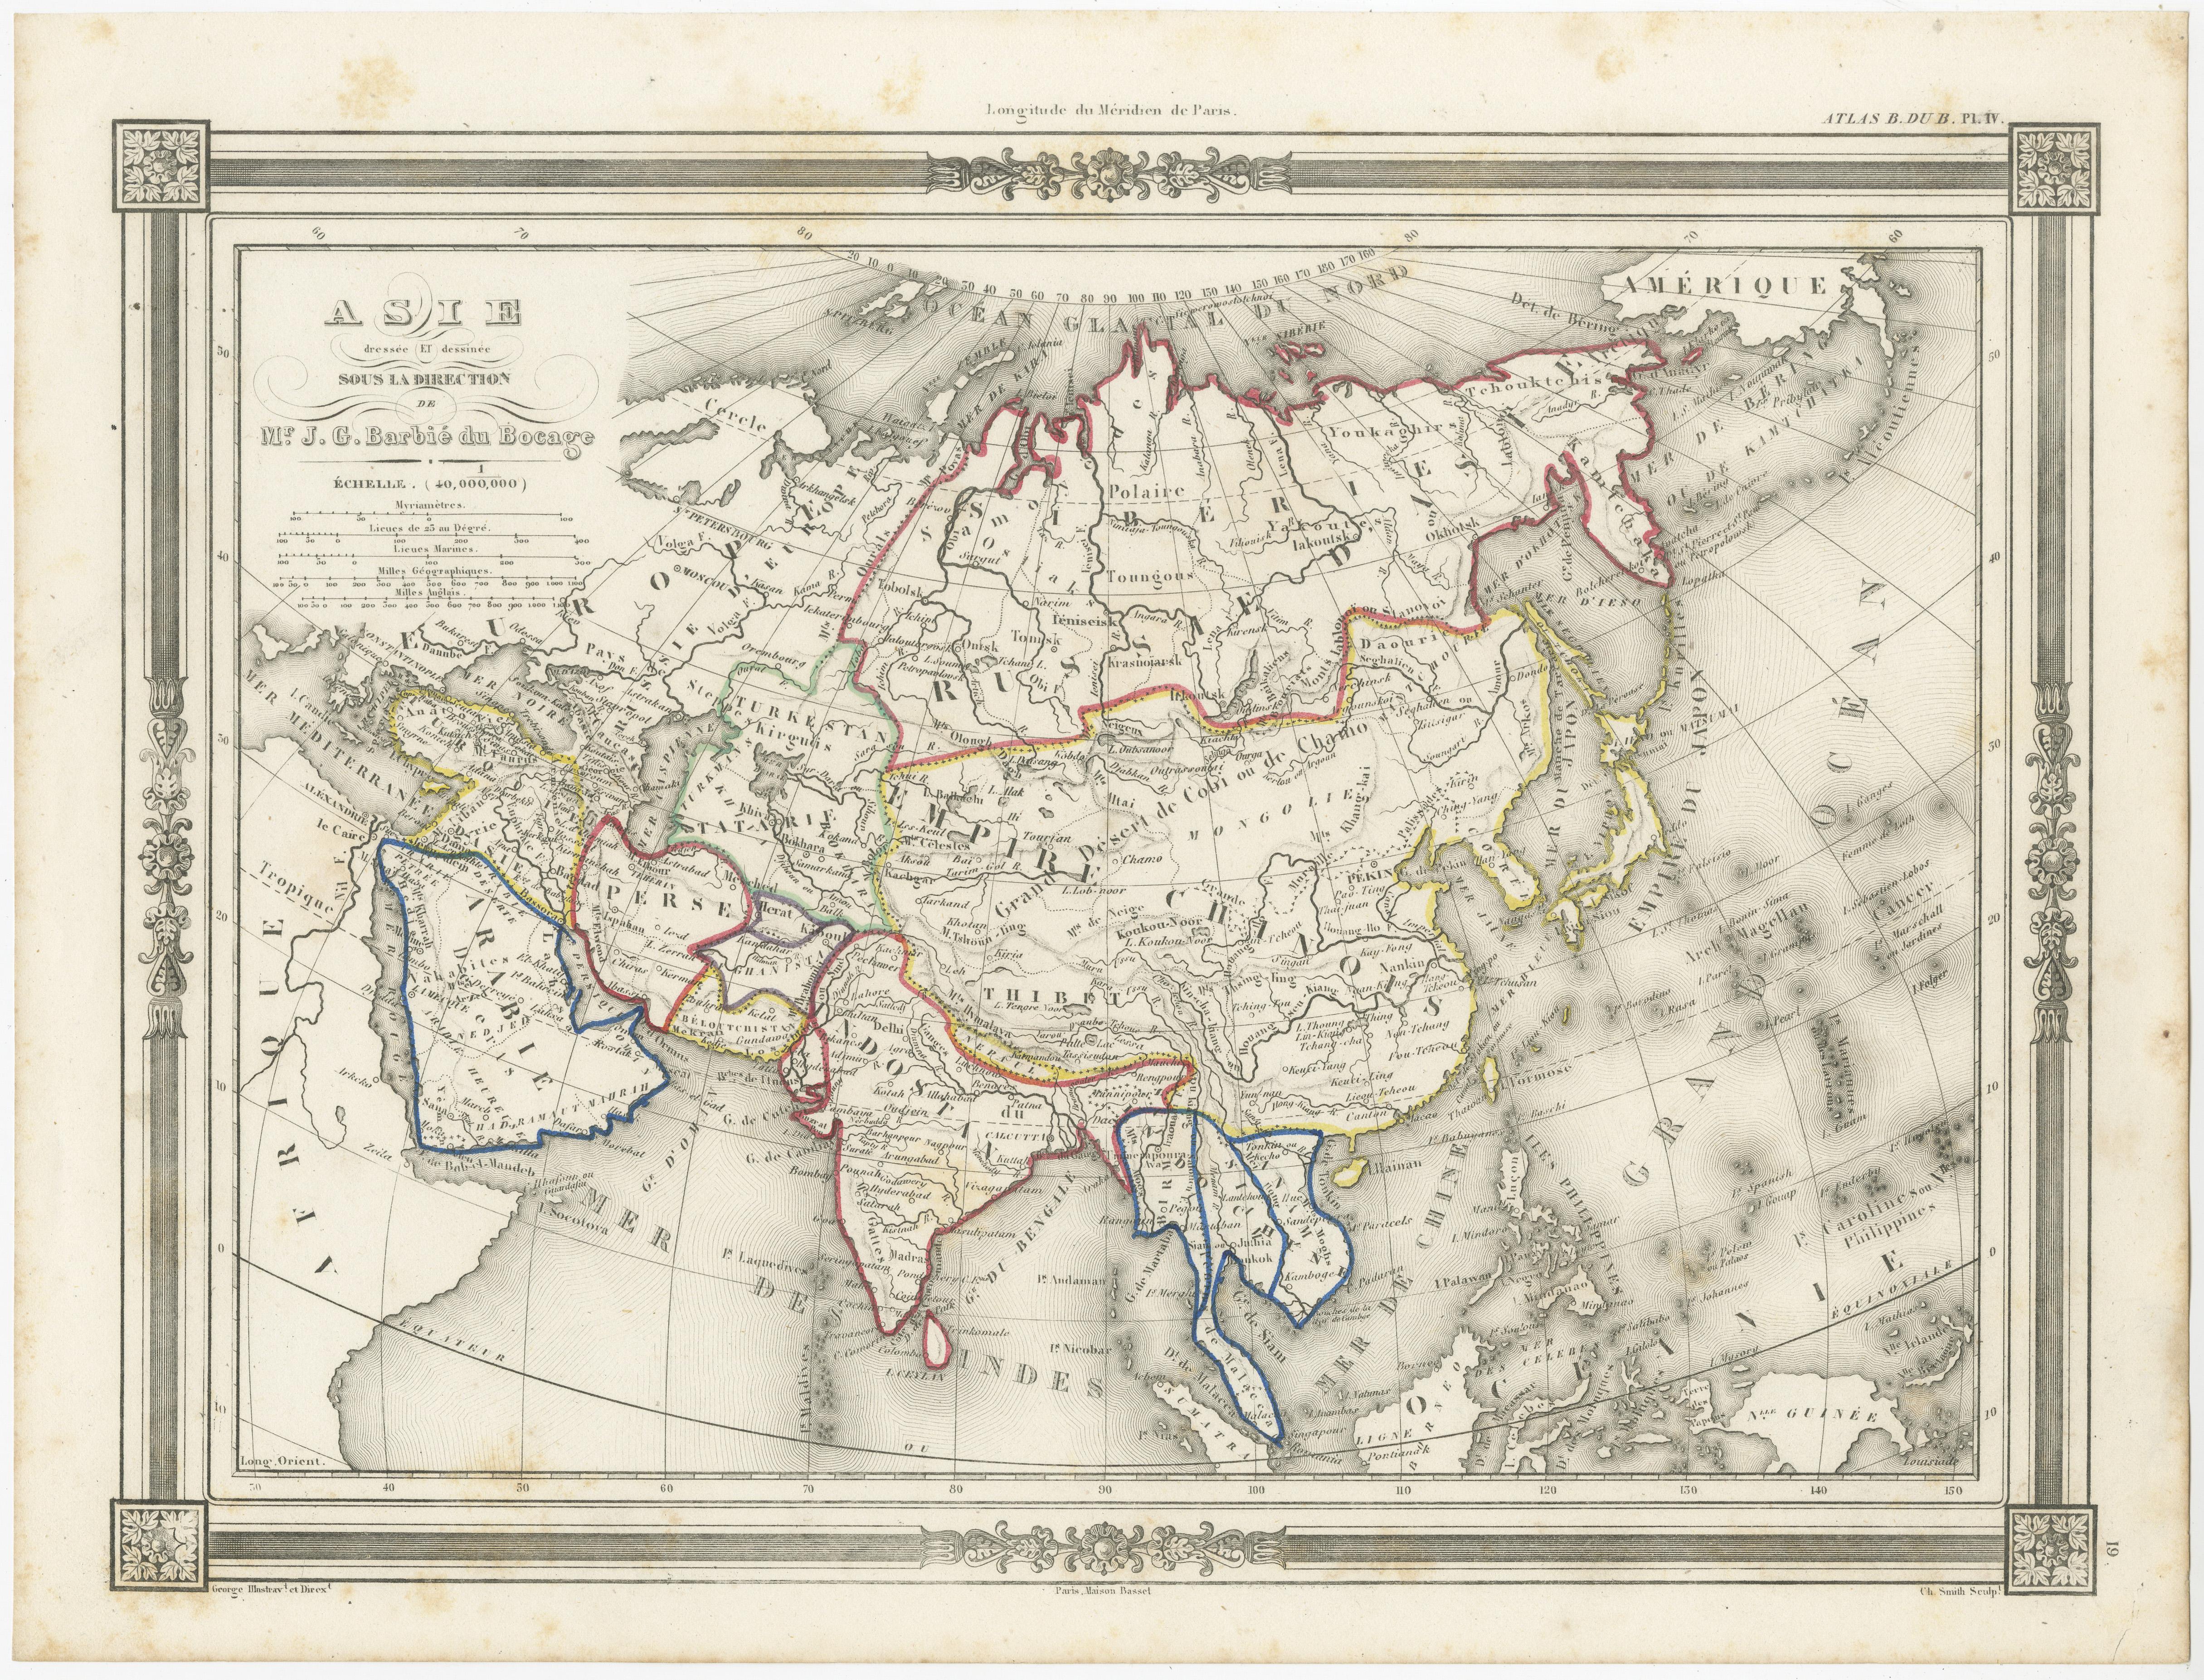 Antique map titled 'Asie'. Attractive map of the Asian continent. The map covers from the Arabian Peninsula and Turkey eastward as far as Kamchatka, Japan, the Philippines and New Guinea. This map originates from Maison Basset's 1852 edition of